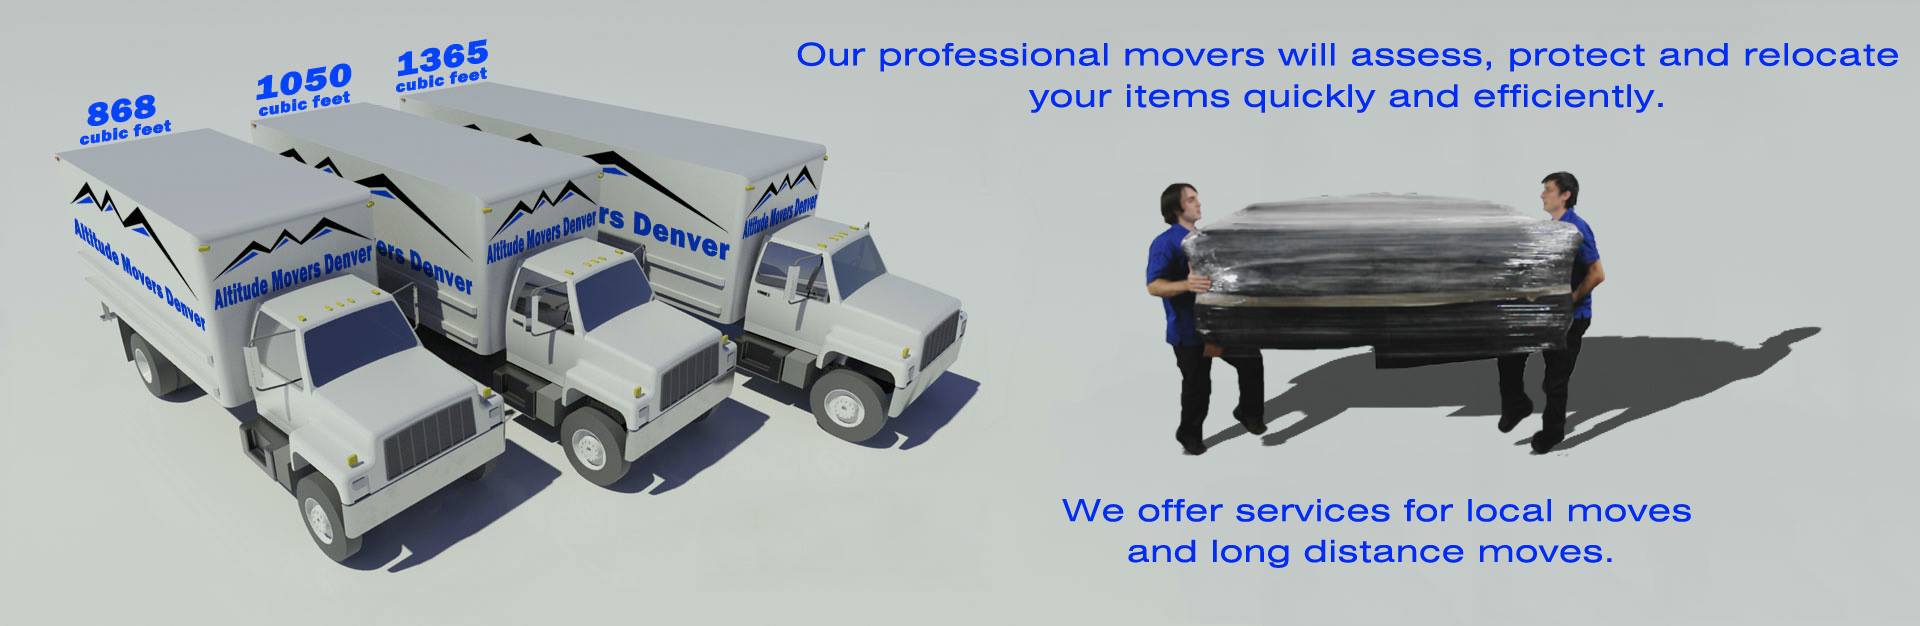 moving company ratings and reviews